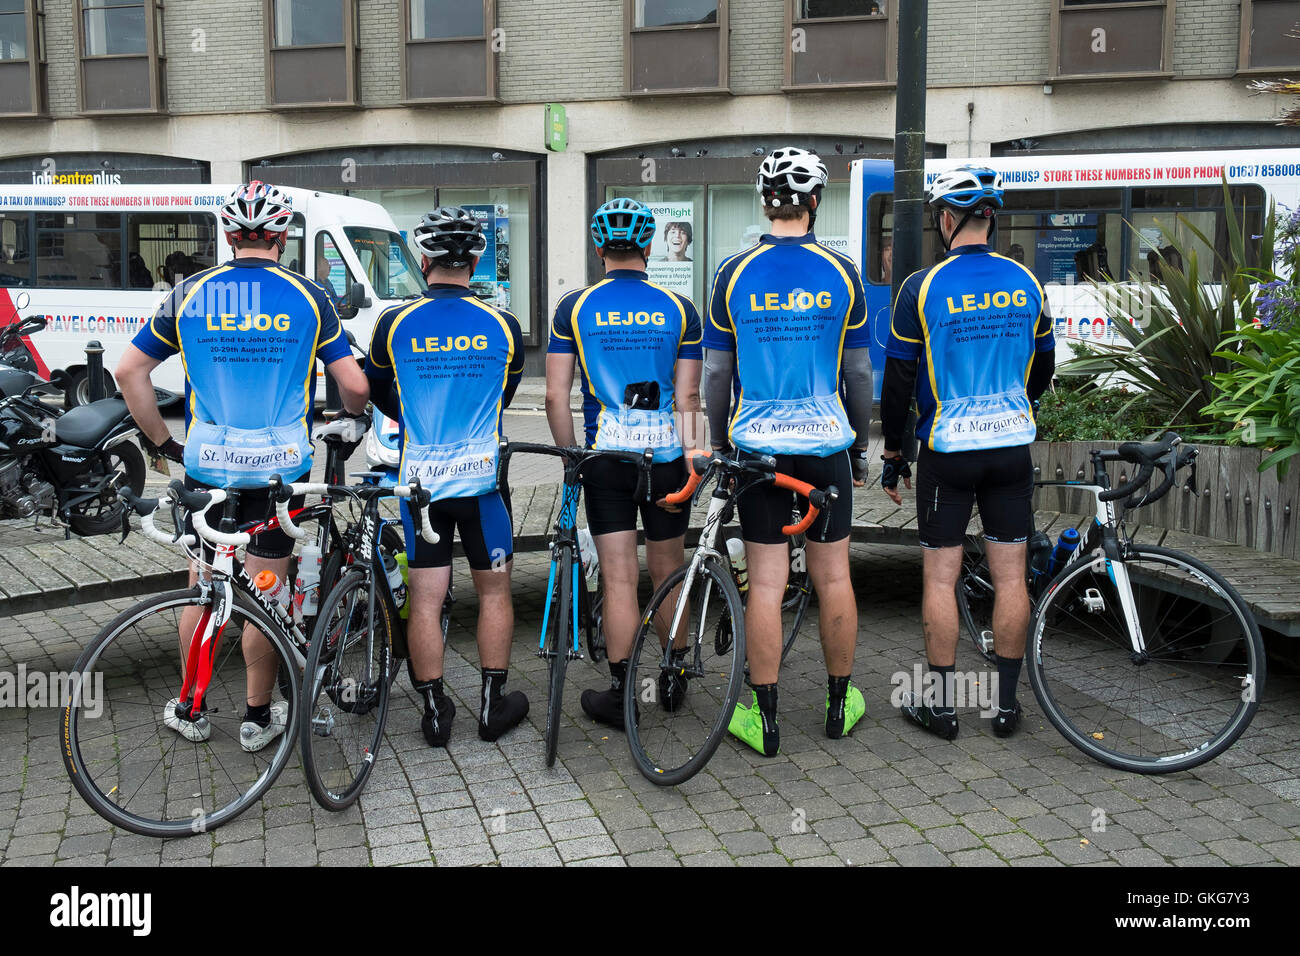 Truro, Cornwall. 20th August, 2016.  Five cyclists from Bristol take a well earned break on the first day of their marathon bike ride from Lands End to John O’Groats. Photographer: Gordon Scammell/Alamy Live News. Stock Photo